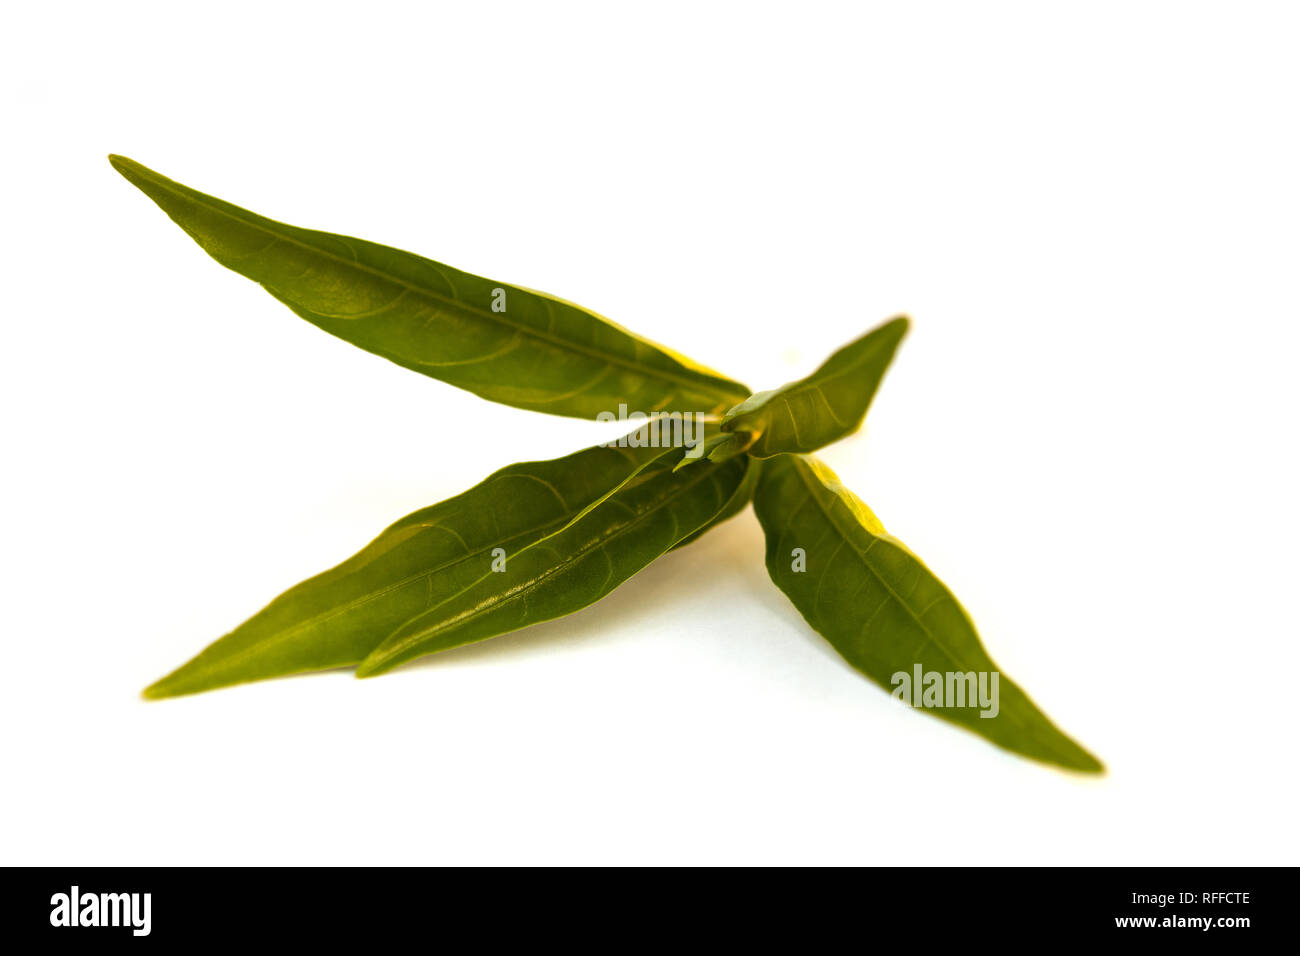 Willow-leaved Justicia medicine flower isolated on white background. Stock Photo